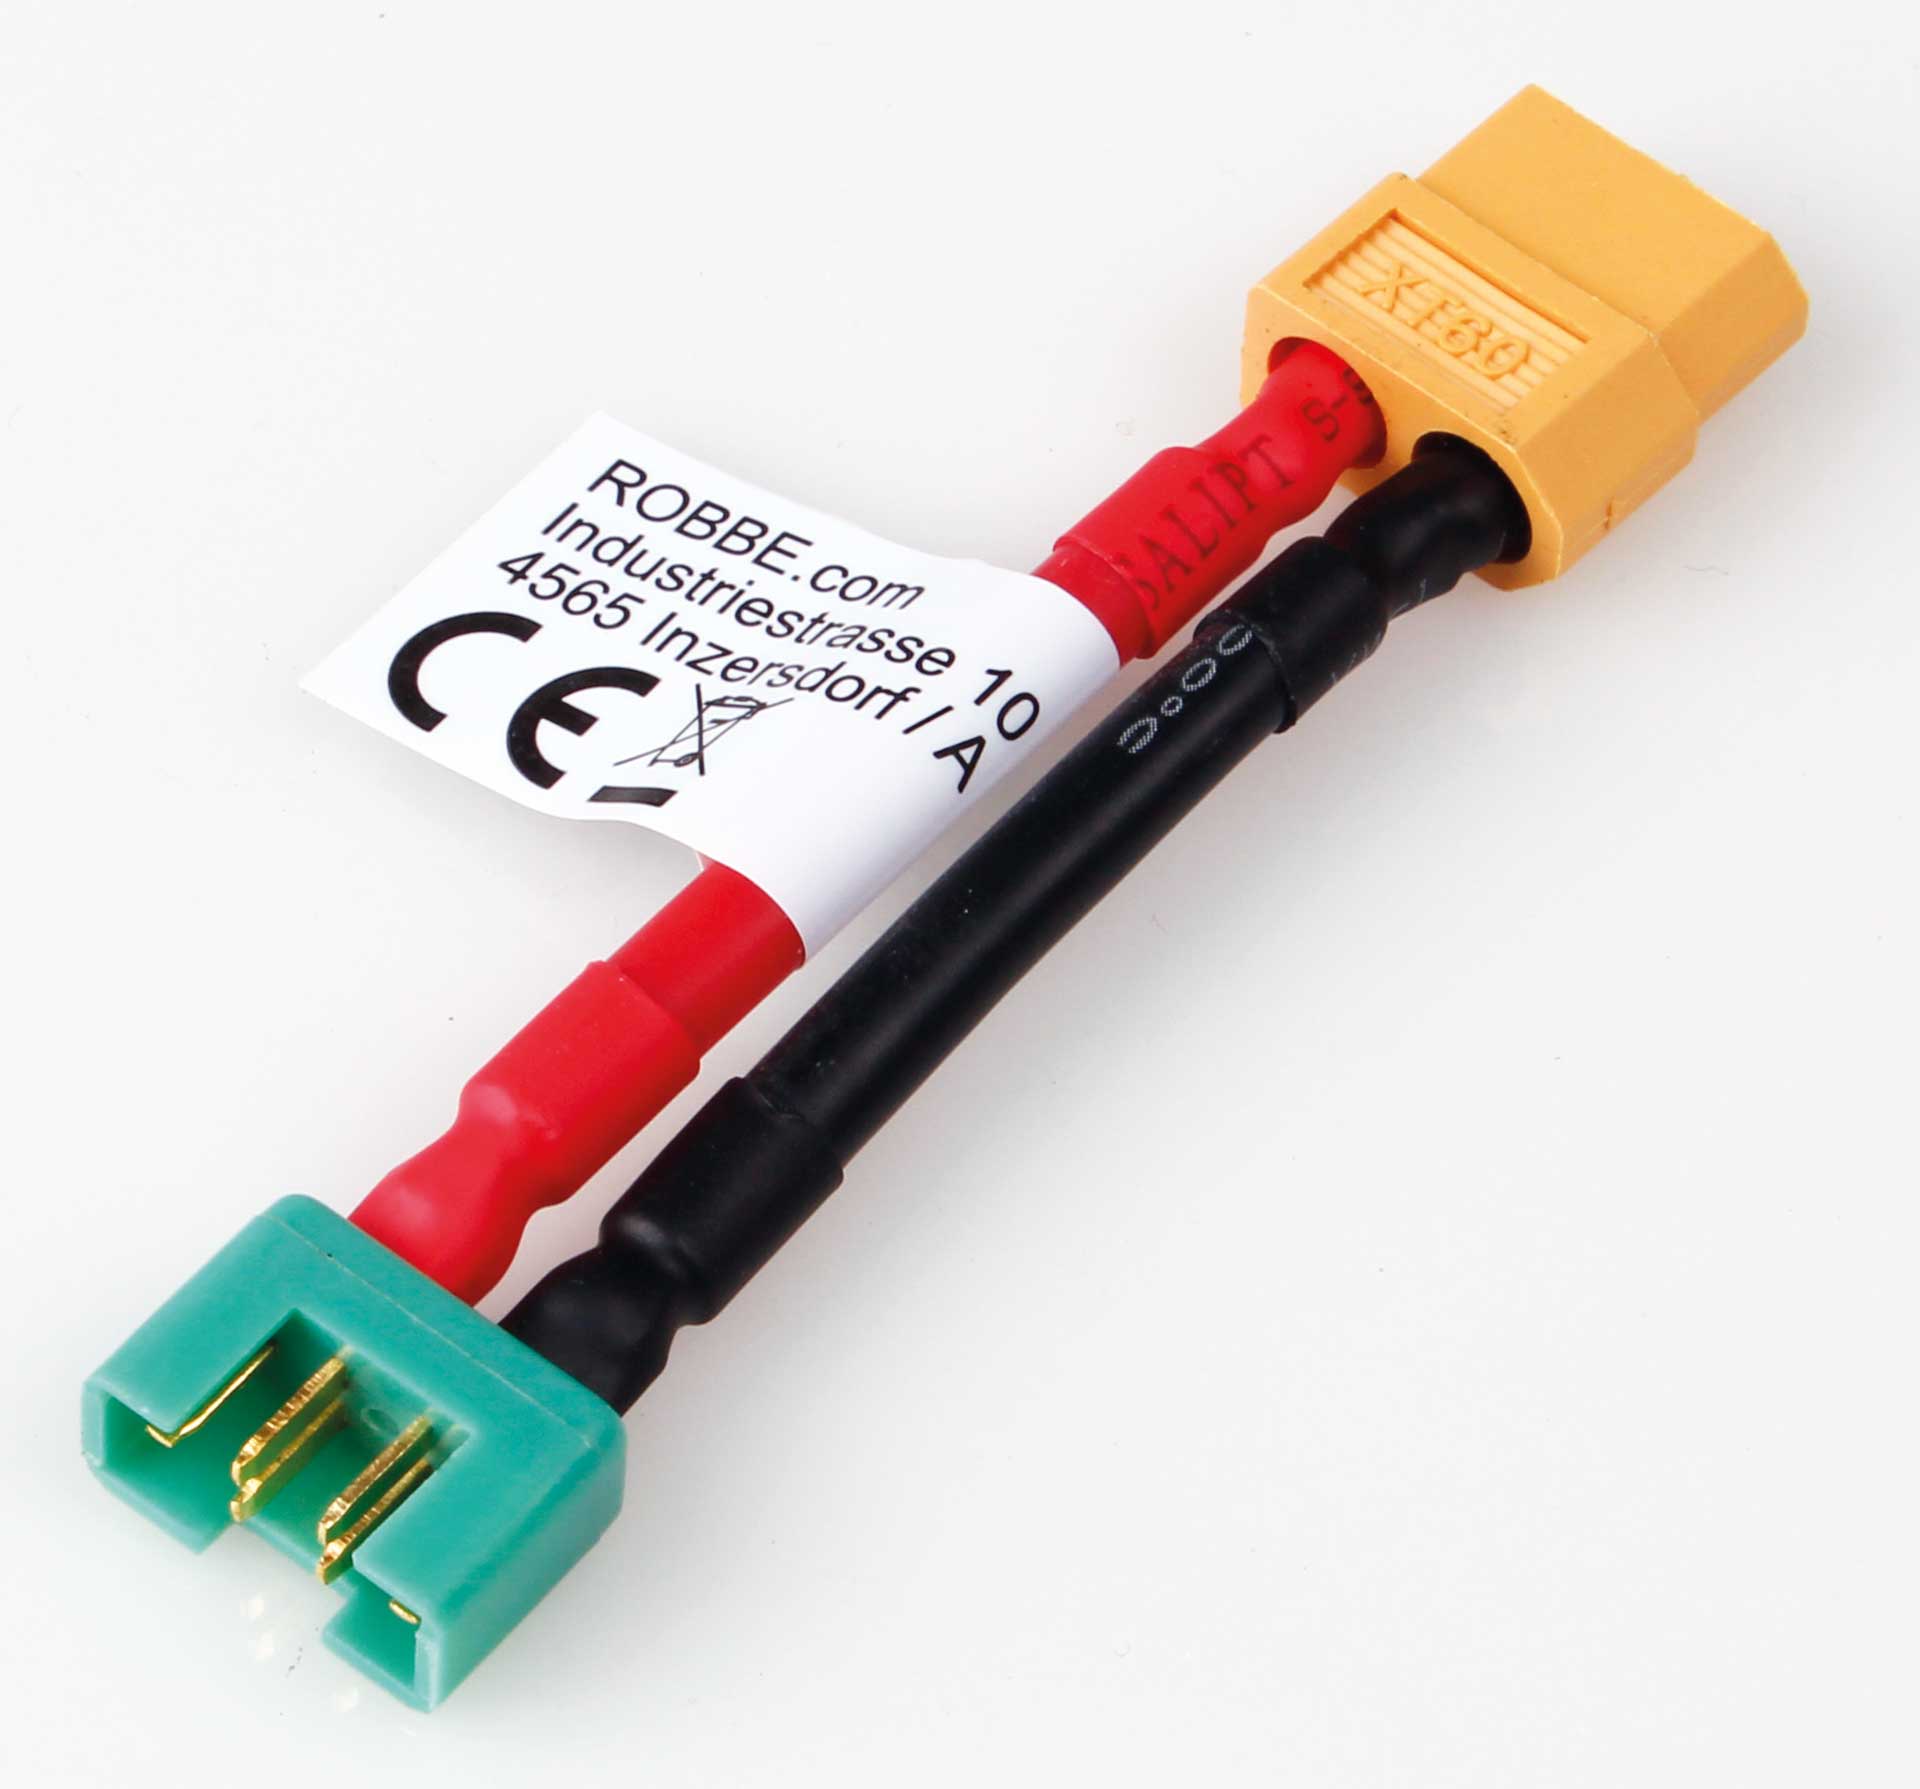 Robbe Modellsport Adapter cable XT-60 female to MPX male 30mm cable length 12AWG 1pcs